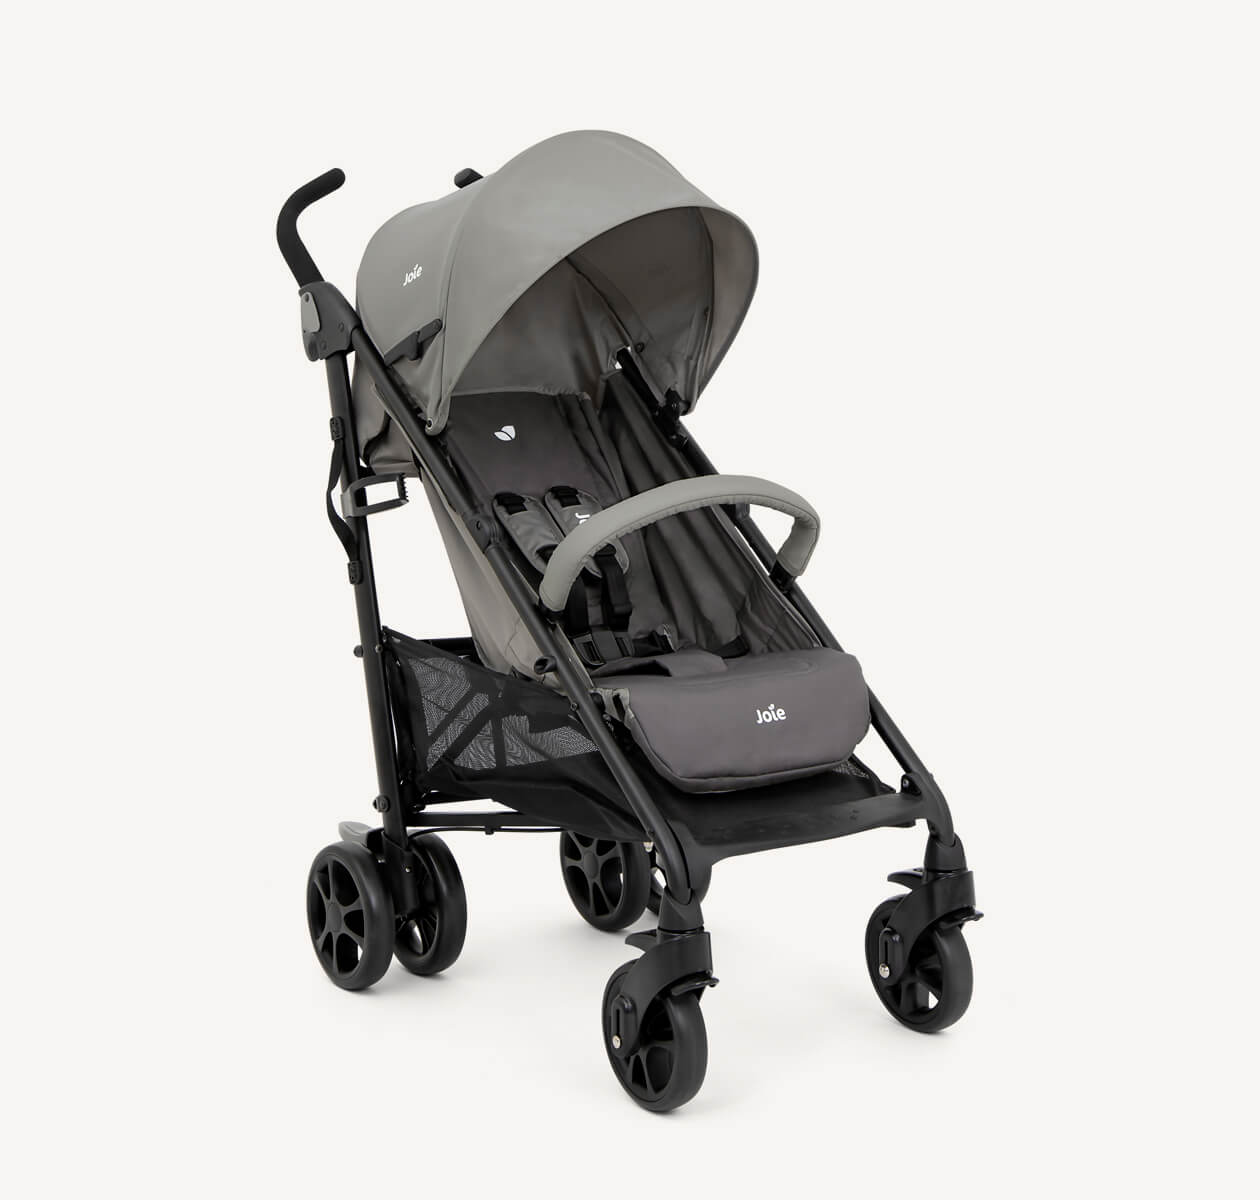  The Joie Brisk LX stroller in two tone gray, at an angle facing to the right.